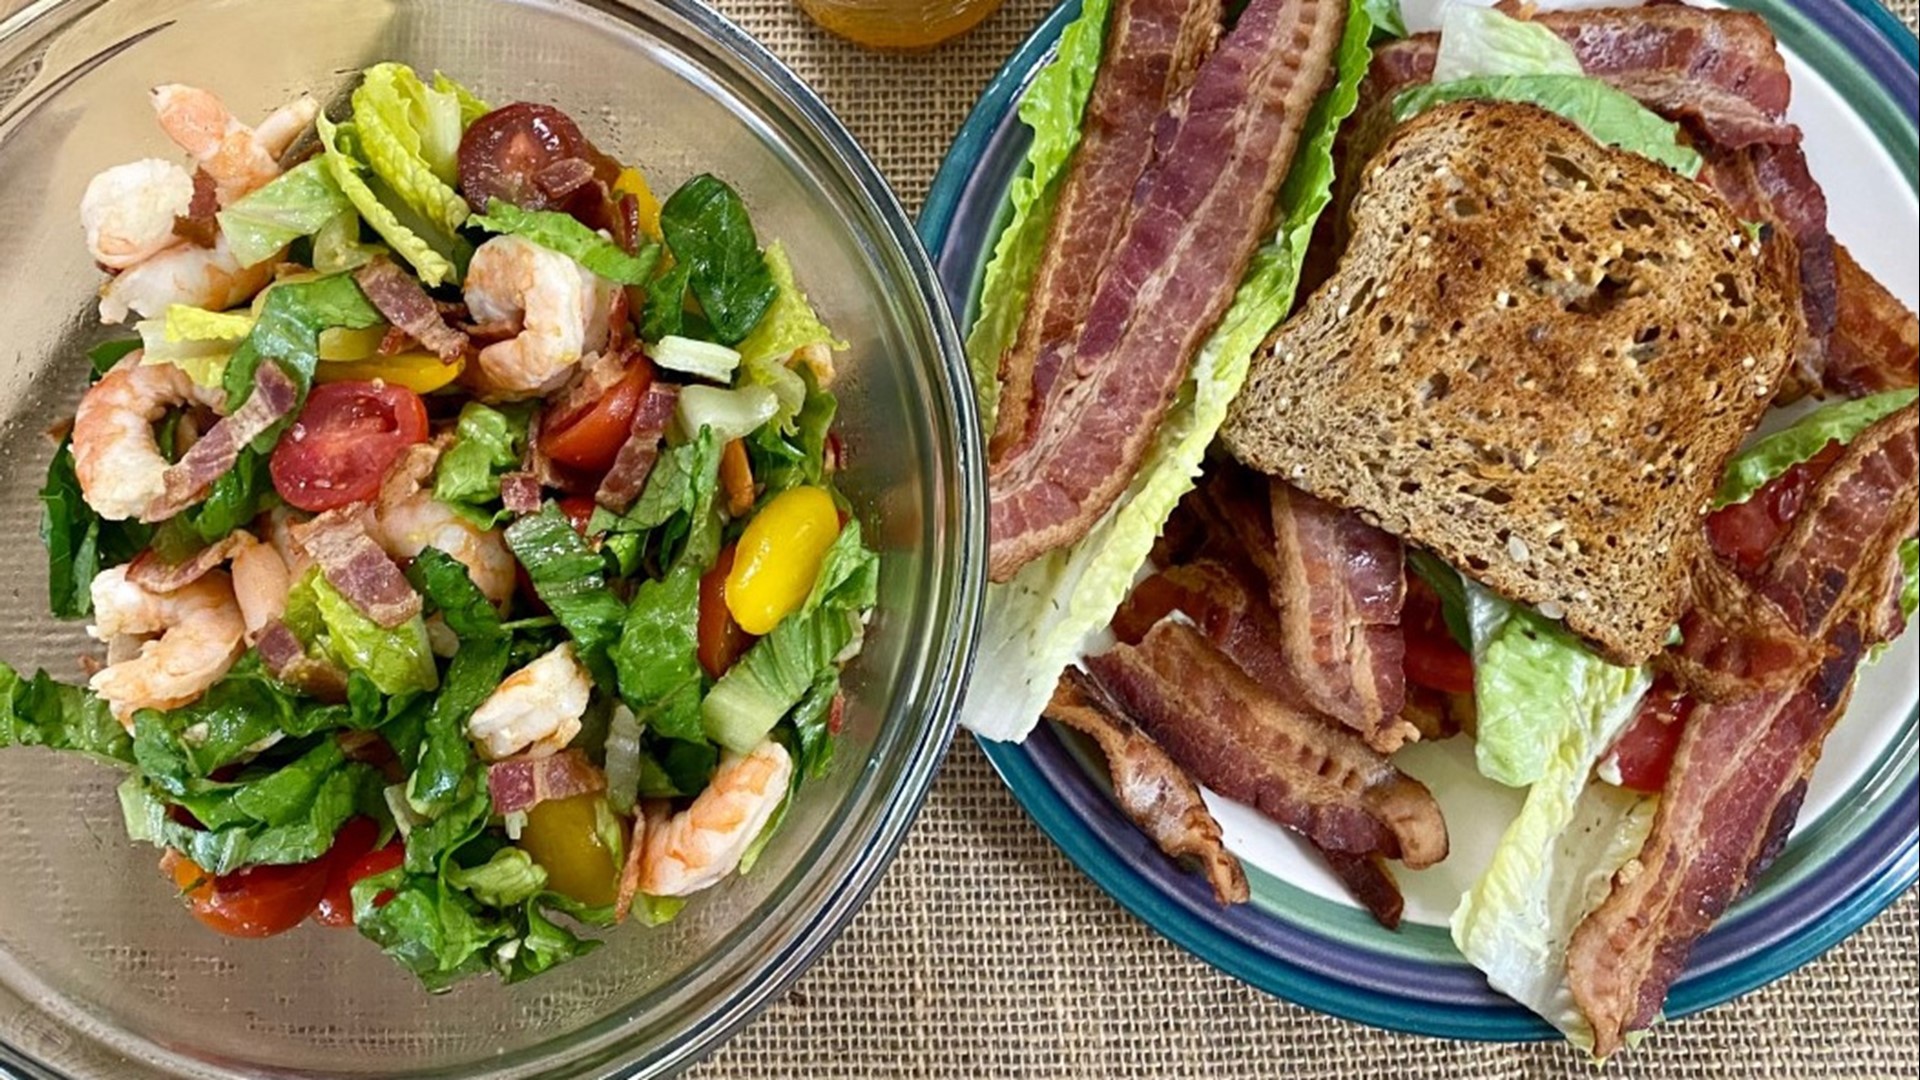 Chef Kevin Belton has some tips to help you take the classic BLT sandwich to the next level!